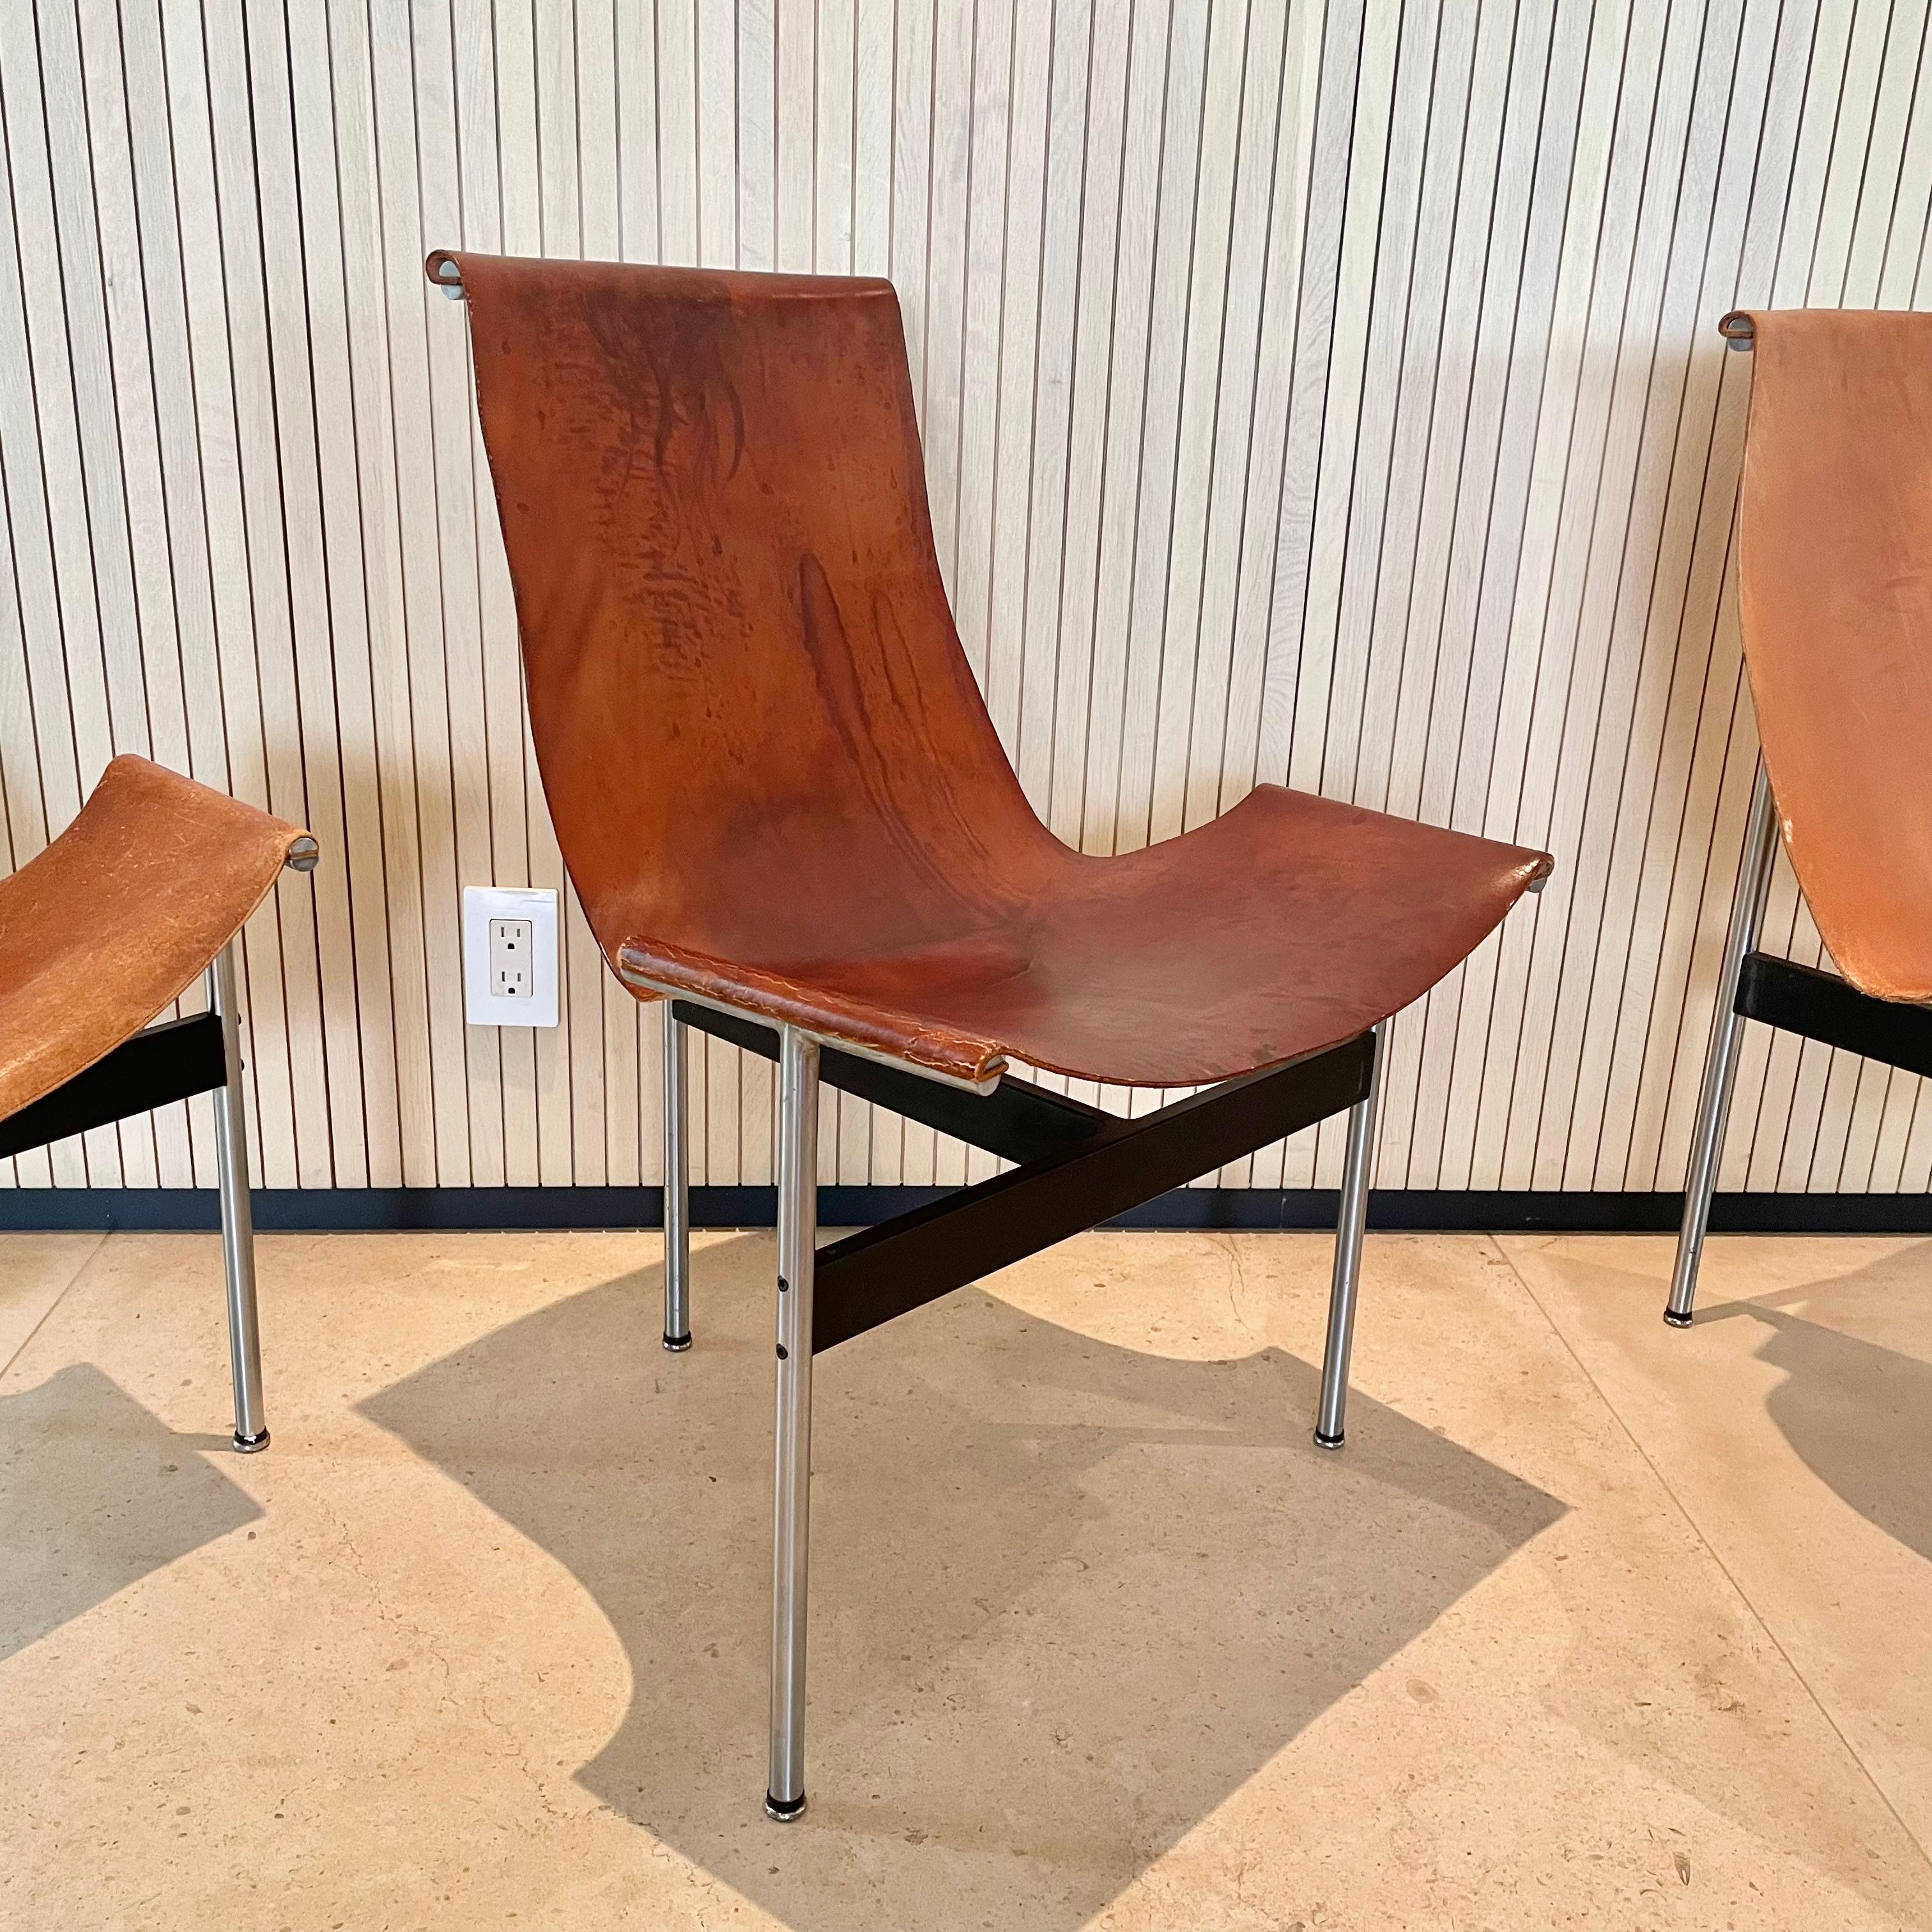 Mid-20th Century T Chairs by Katavolos, Littell and Kelley for Laverne, 1950s USA